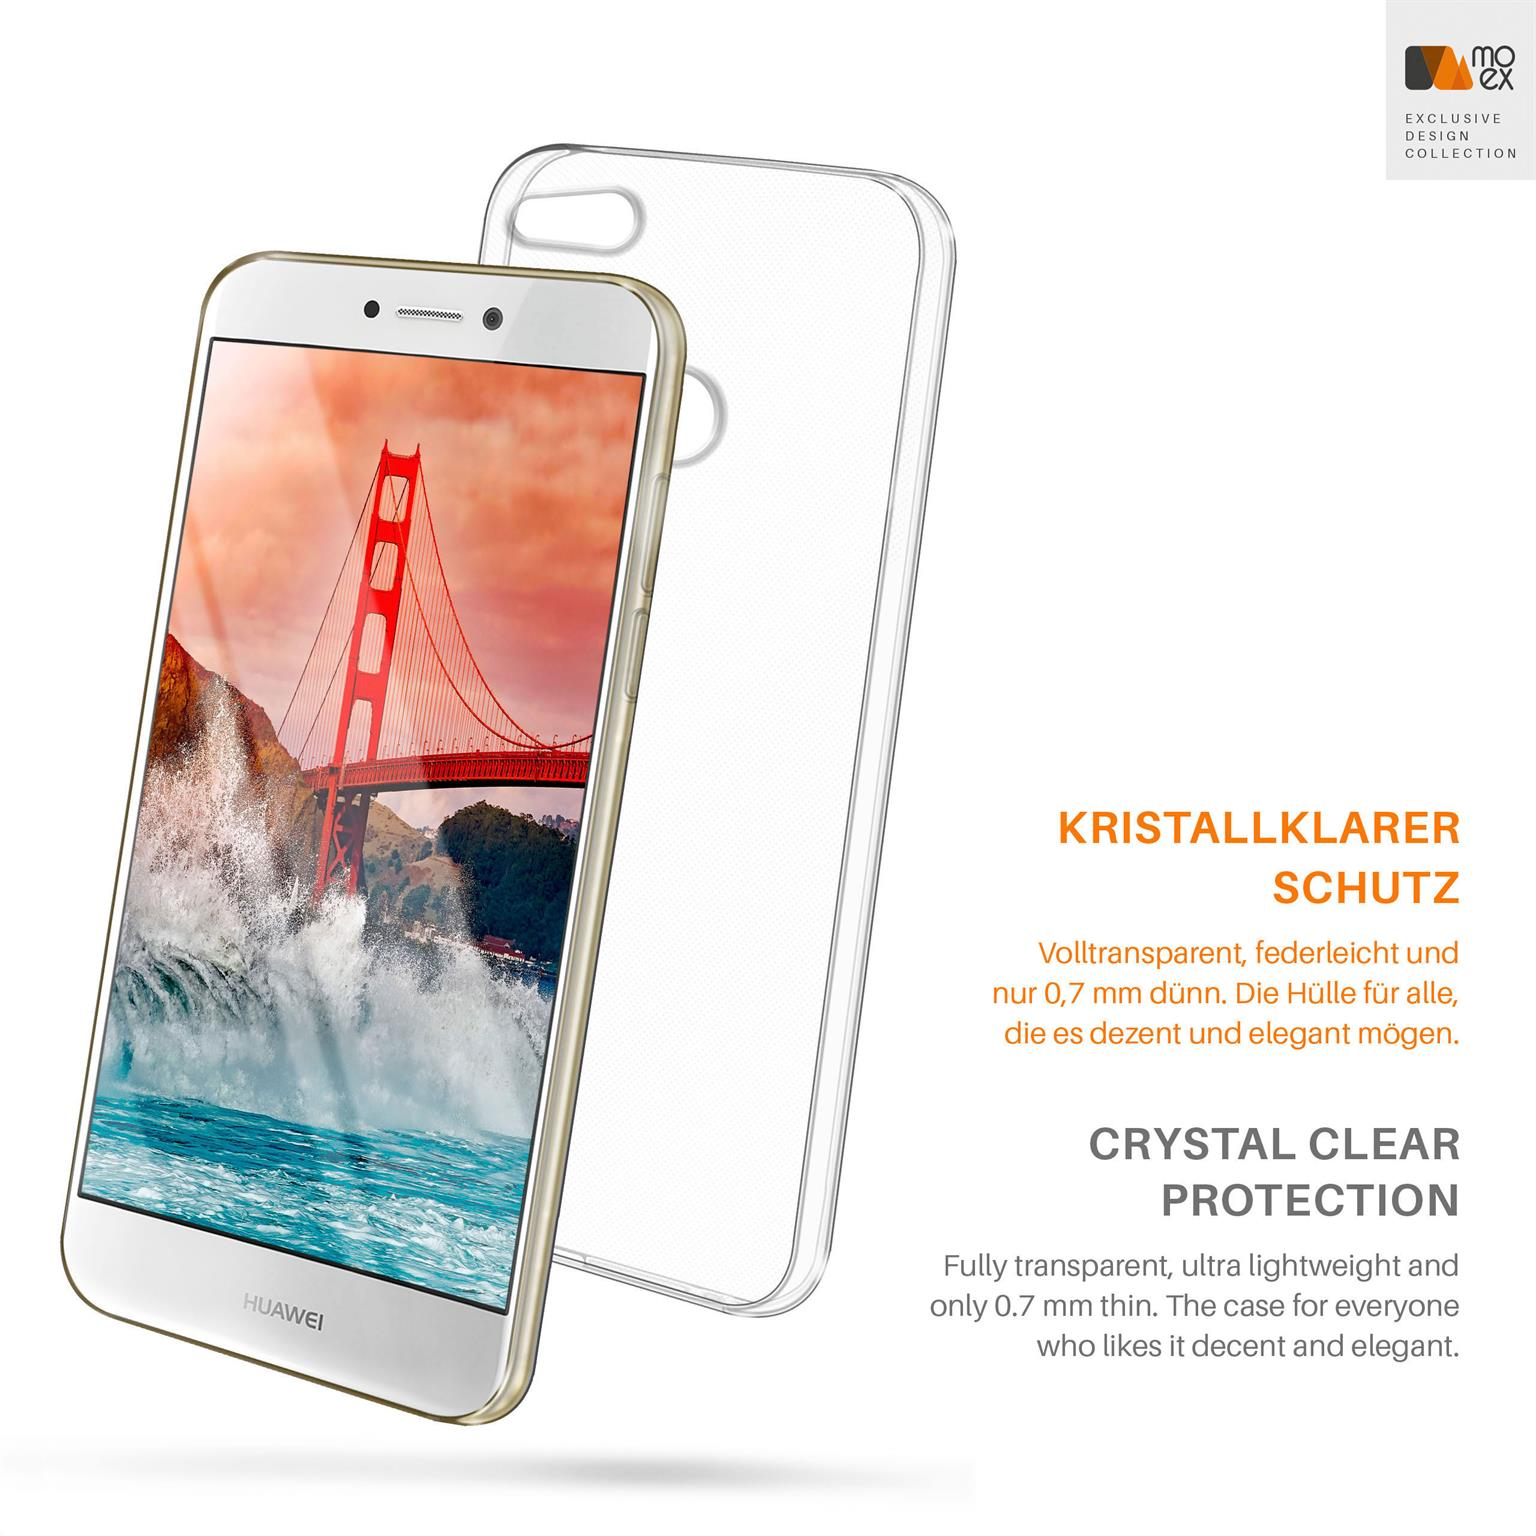 Backcover, Crystal-Clear P8 MOEX Huawei, Case, 2017, Lite Aero